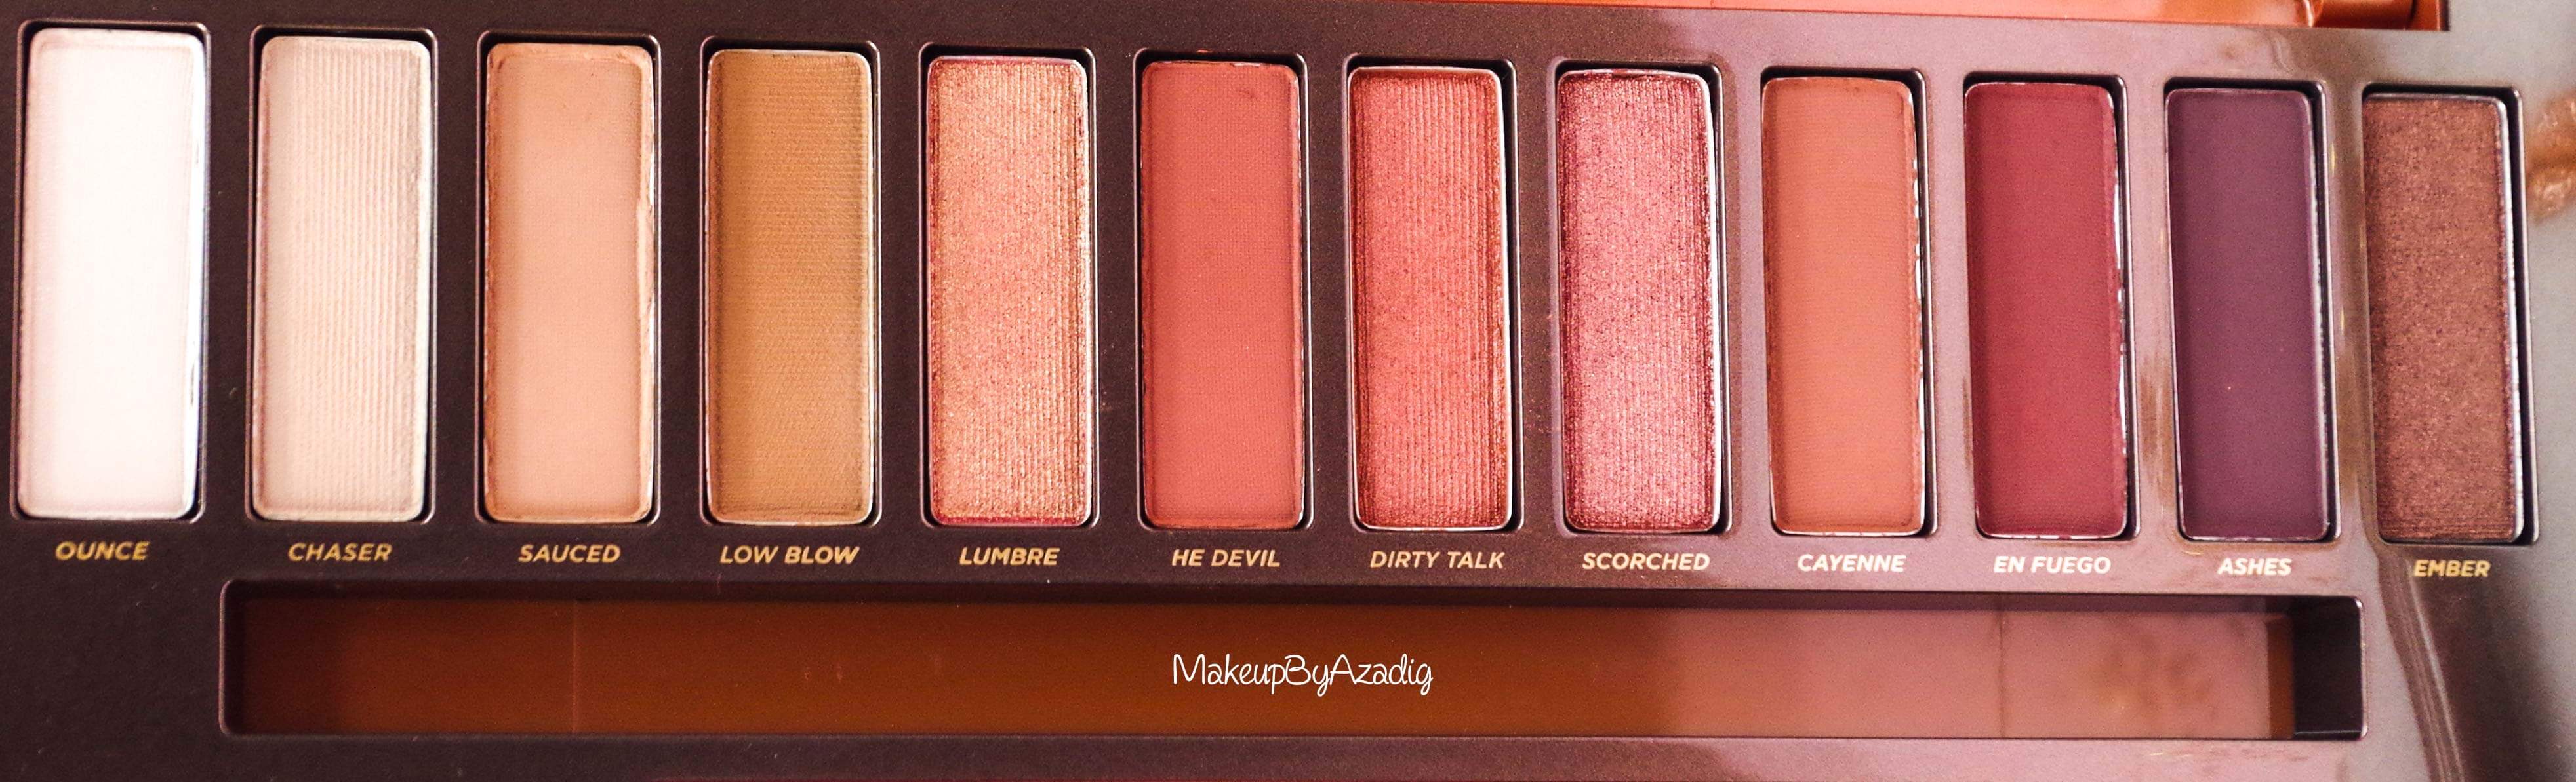 revue-review-nouvelle-palette-naked-heat-urban-decay-sephora-avis-prix-france-makeupbyazadig-swatch-swatches